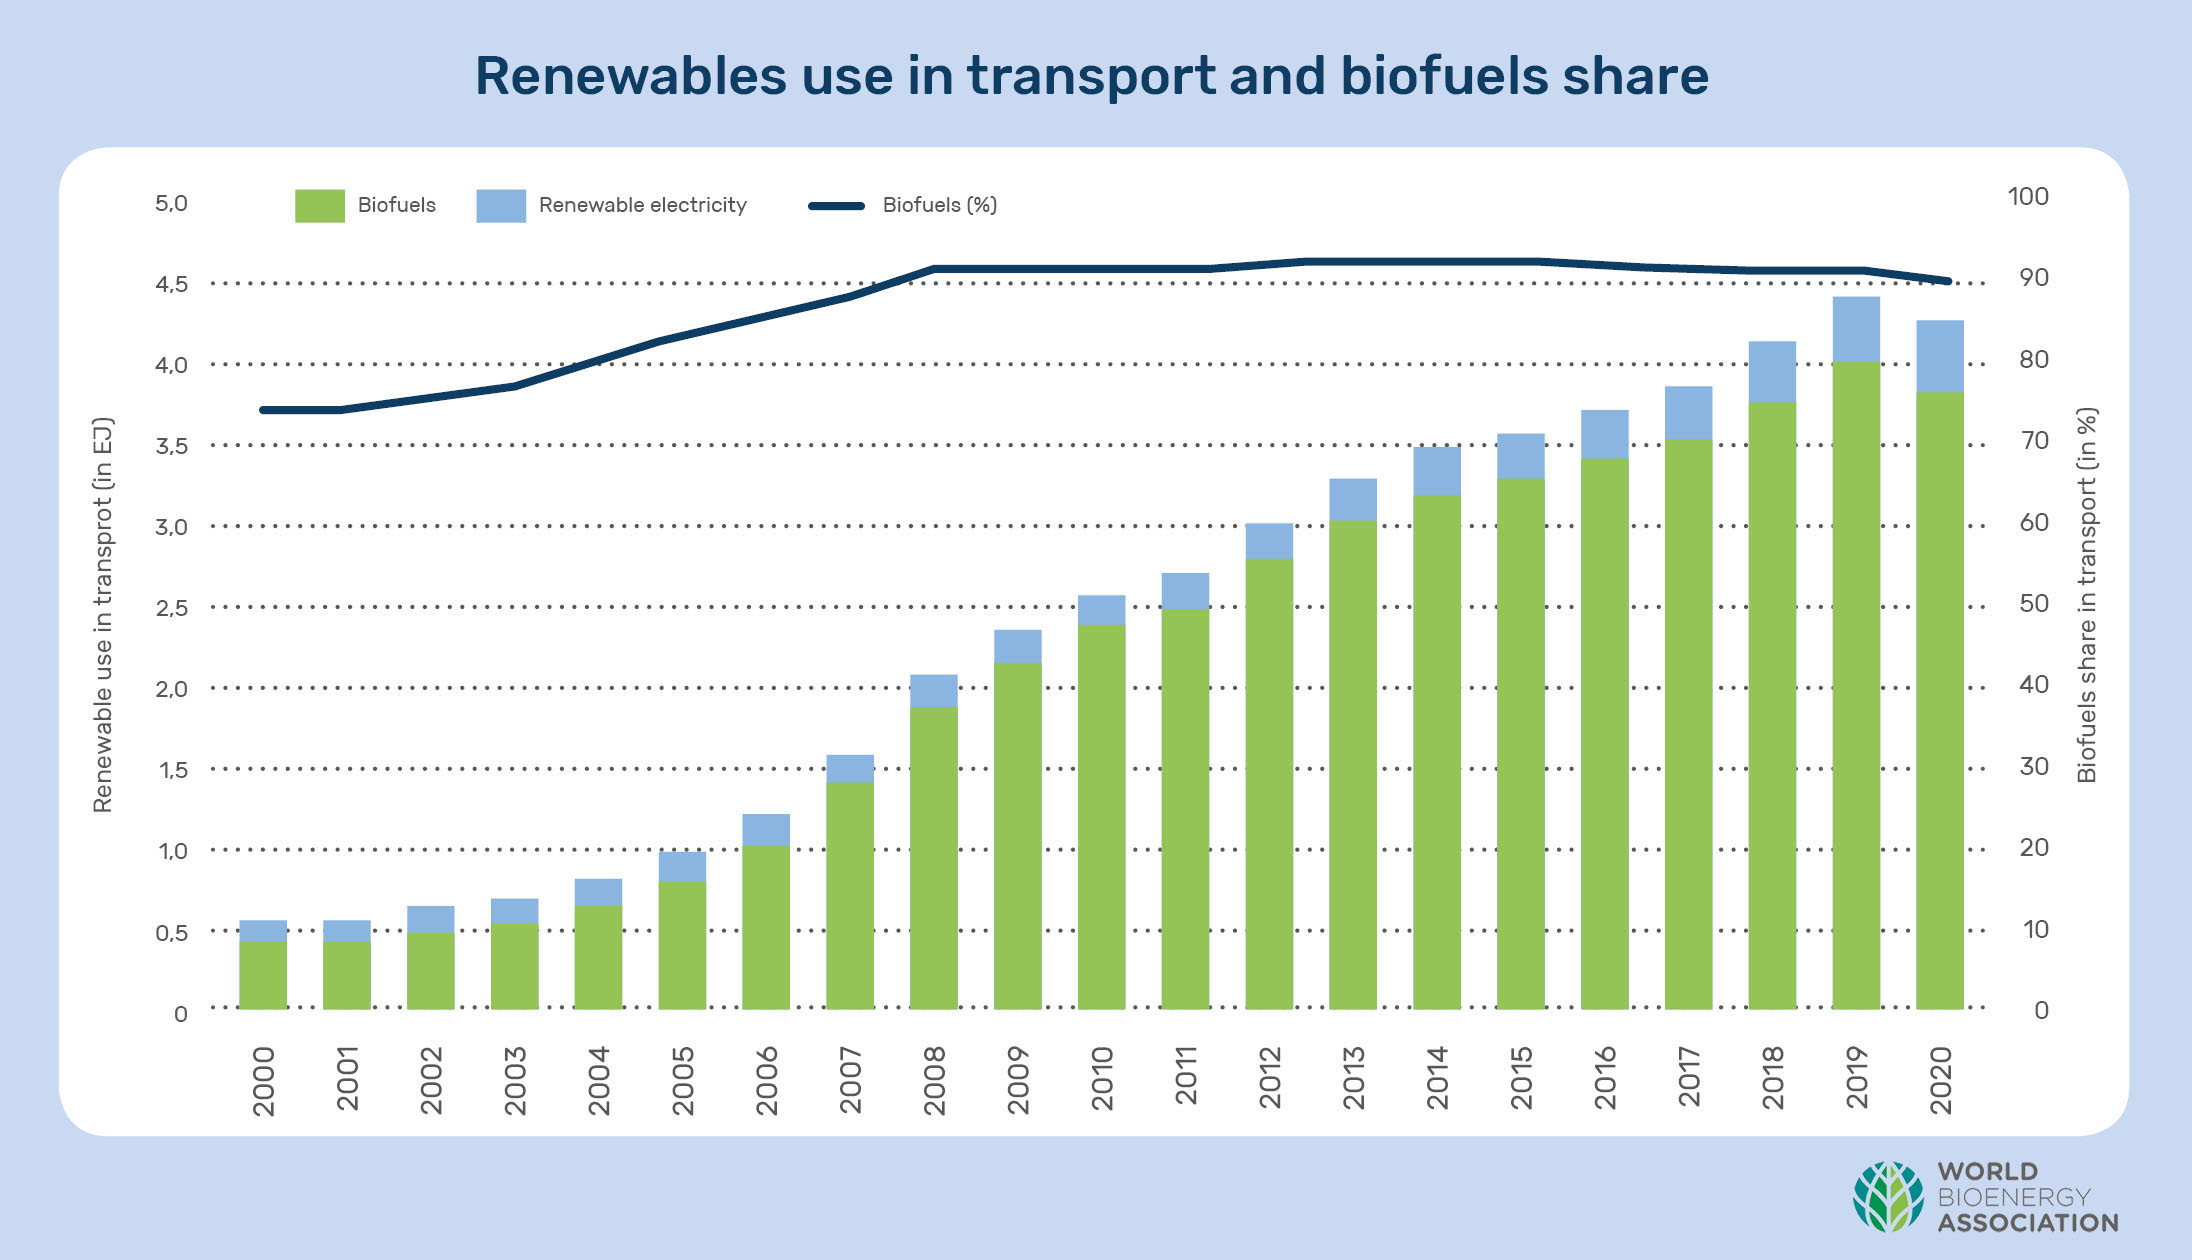 RES use in transport and biofuels share